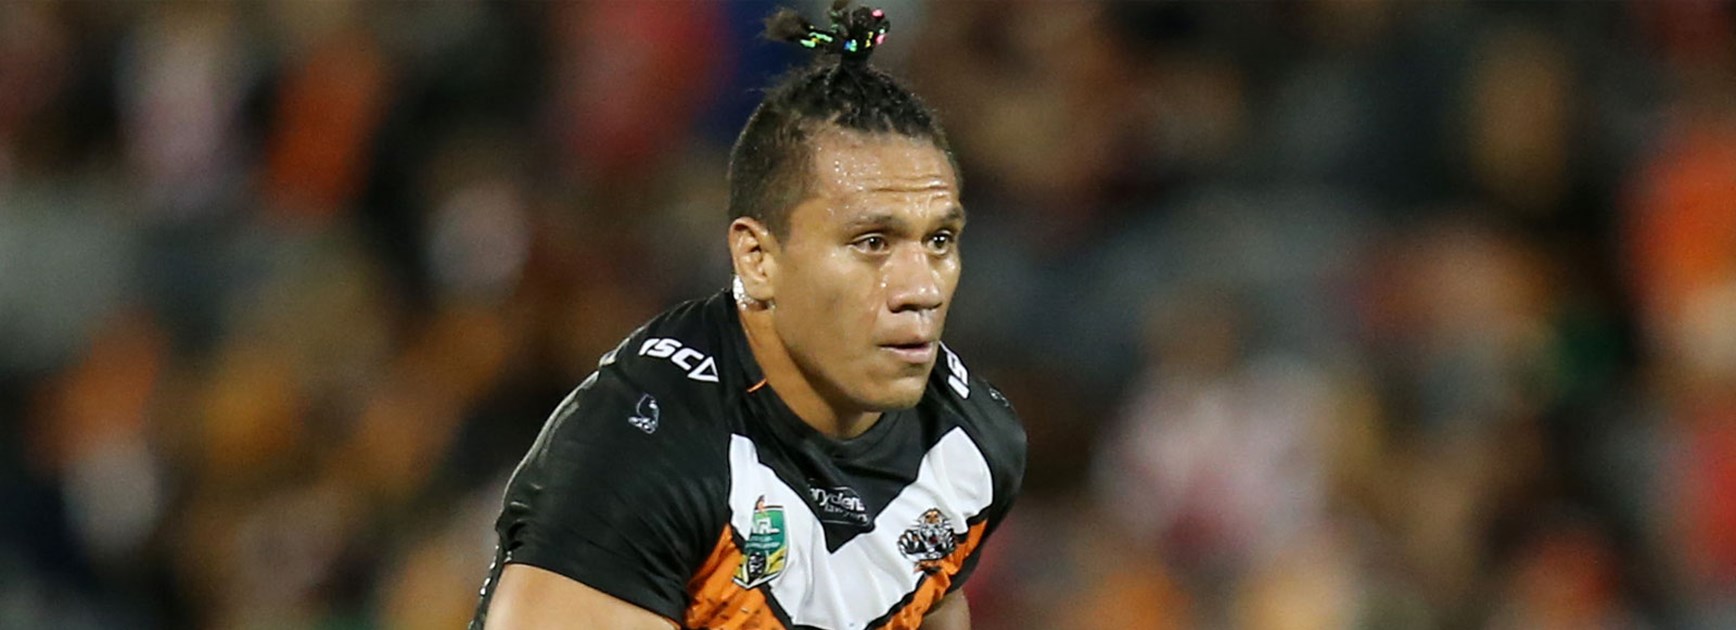 Sauaso Sue has been shifted to the right edge this season where he has helped protect Wests Tigers playmaker Mitch Moses in defence.